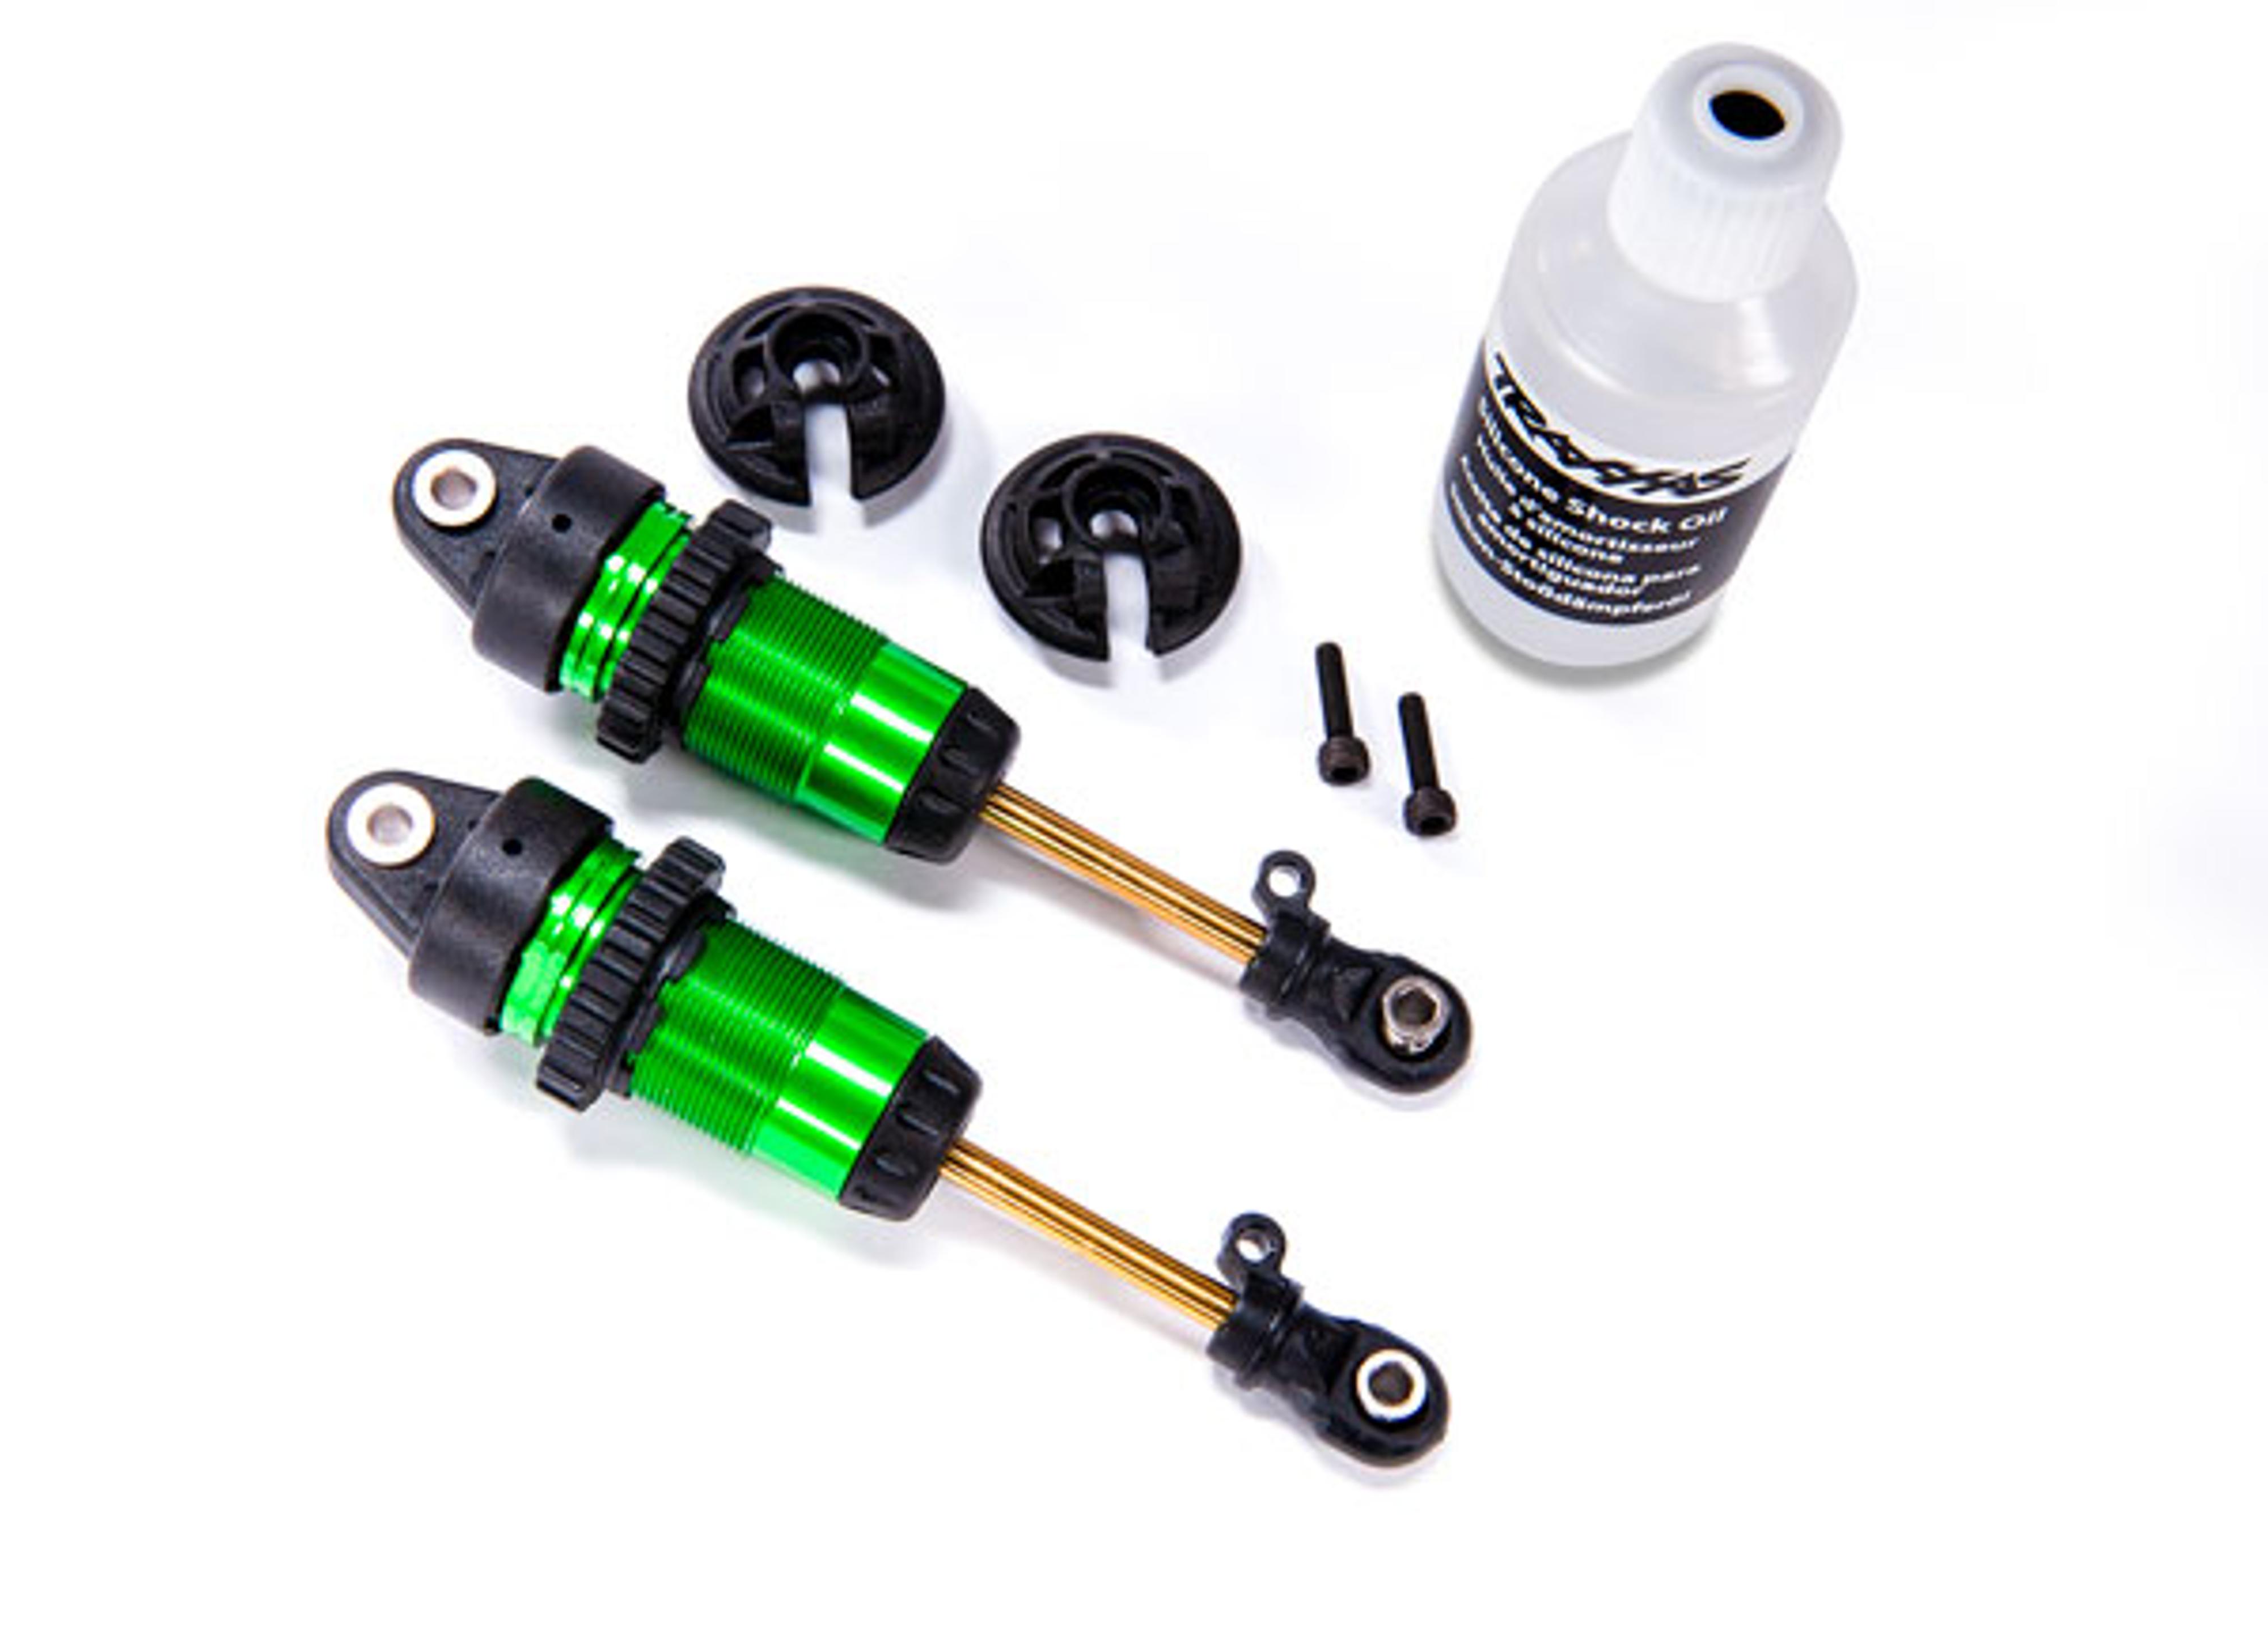 Traxxas Shocks, GTR long Green-anod., PTFE-coated bodies w/TiN shafts (1 pair)